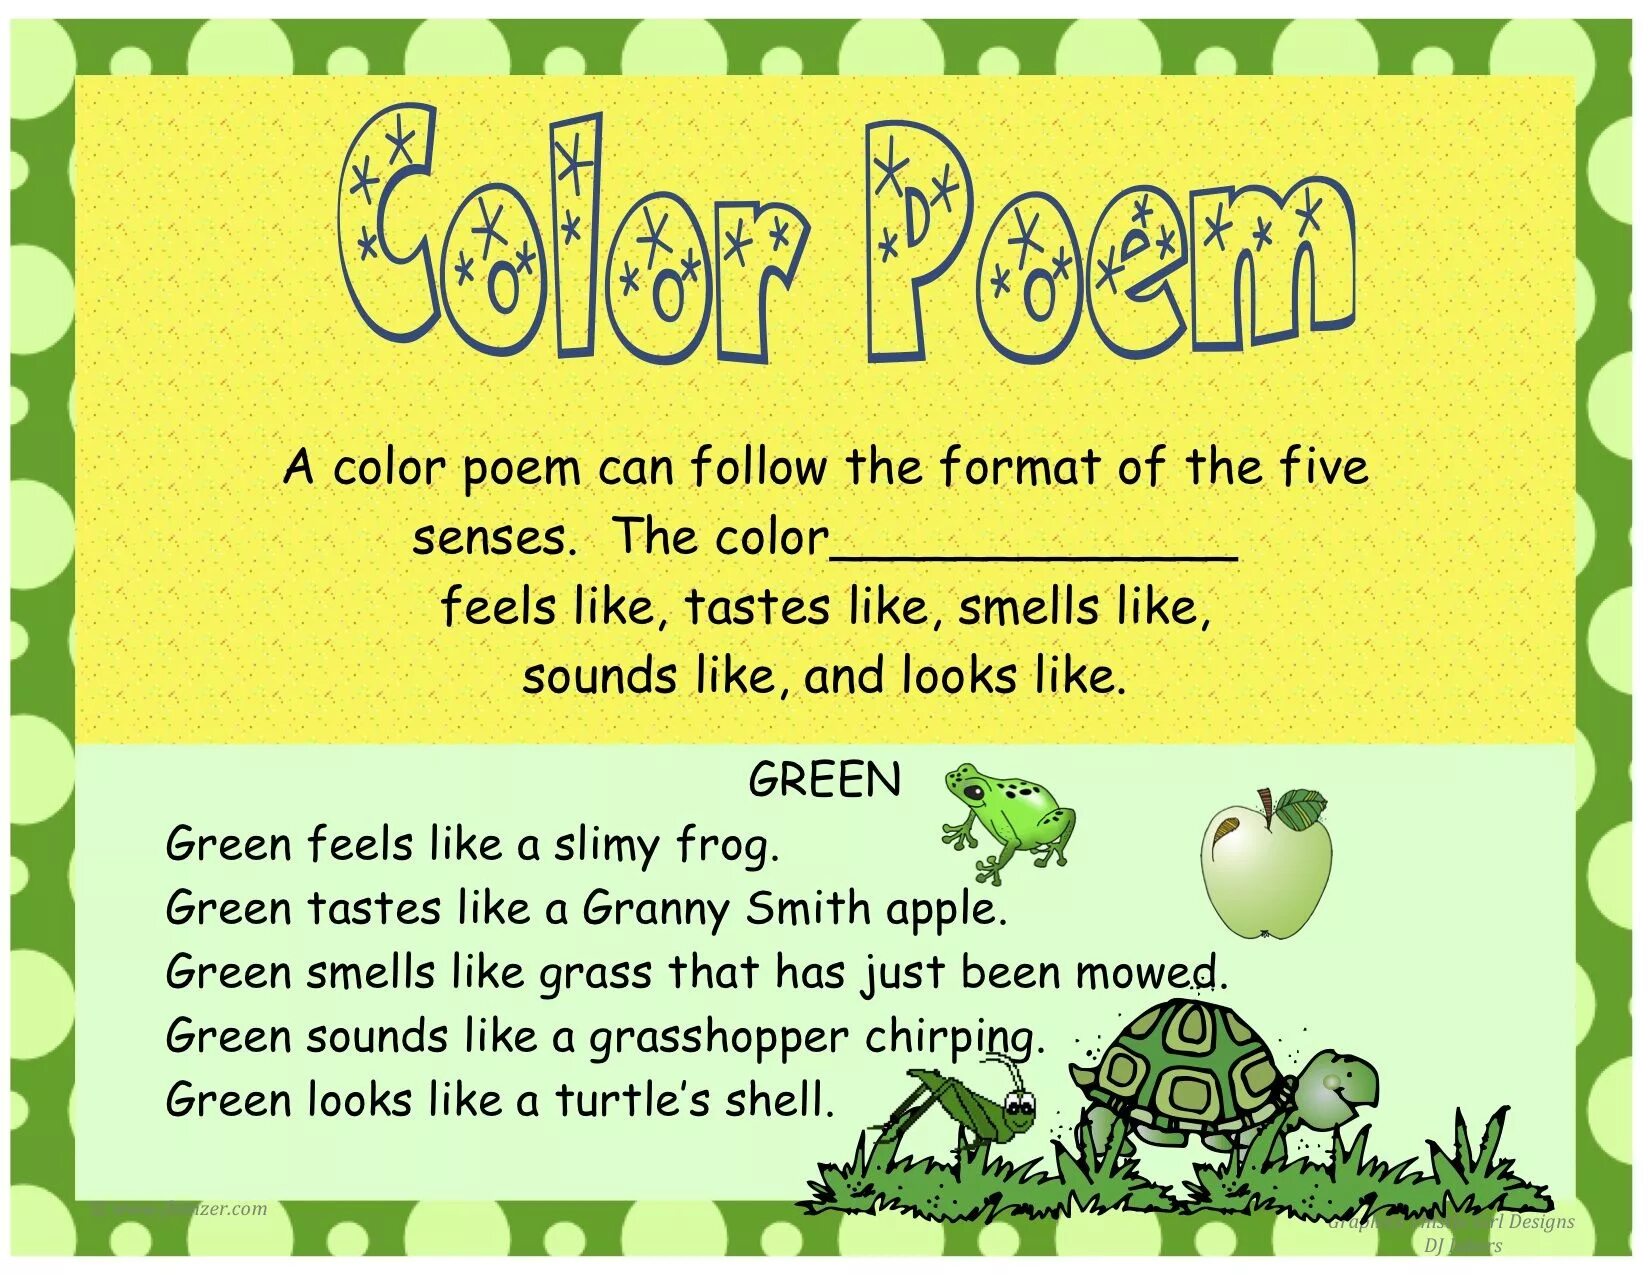 Sam to learn the poem. Poems for Kids. Poems about the Colors. Poems for children in English. Colour poem.